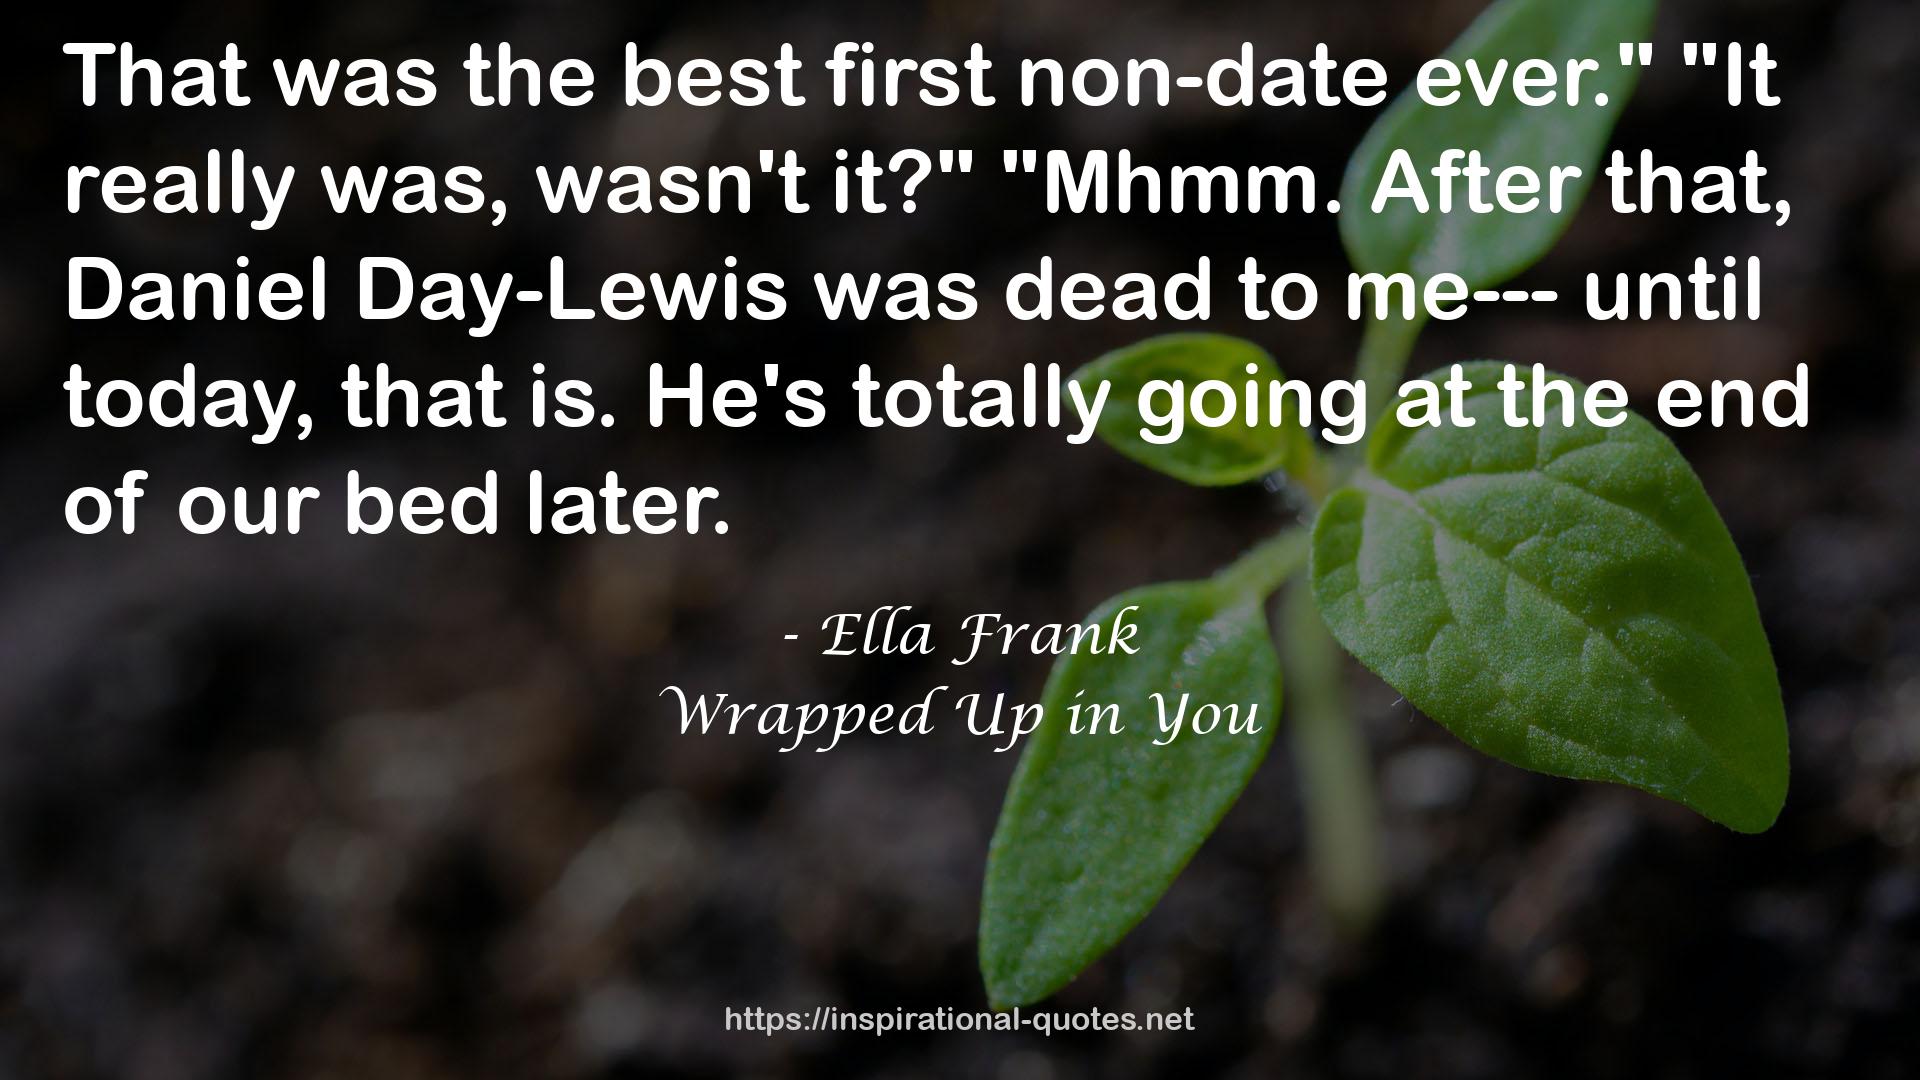 Wrapped Up in You QUOTES